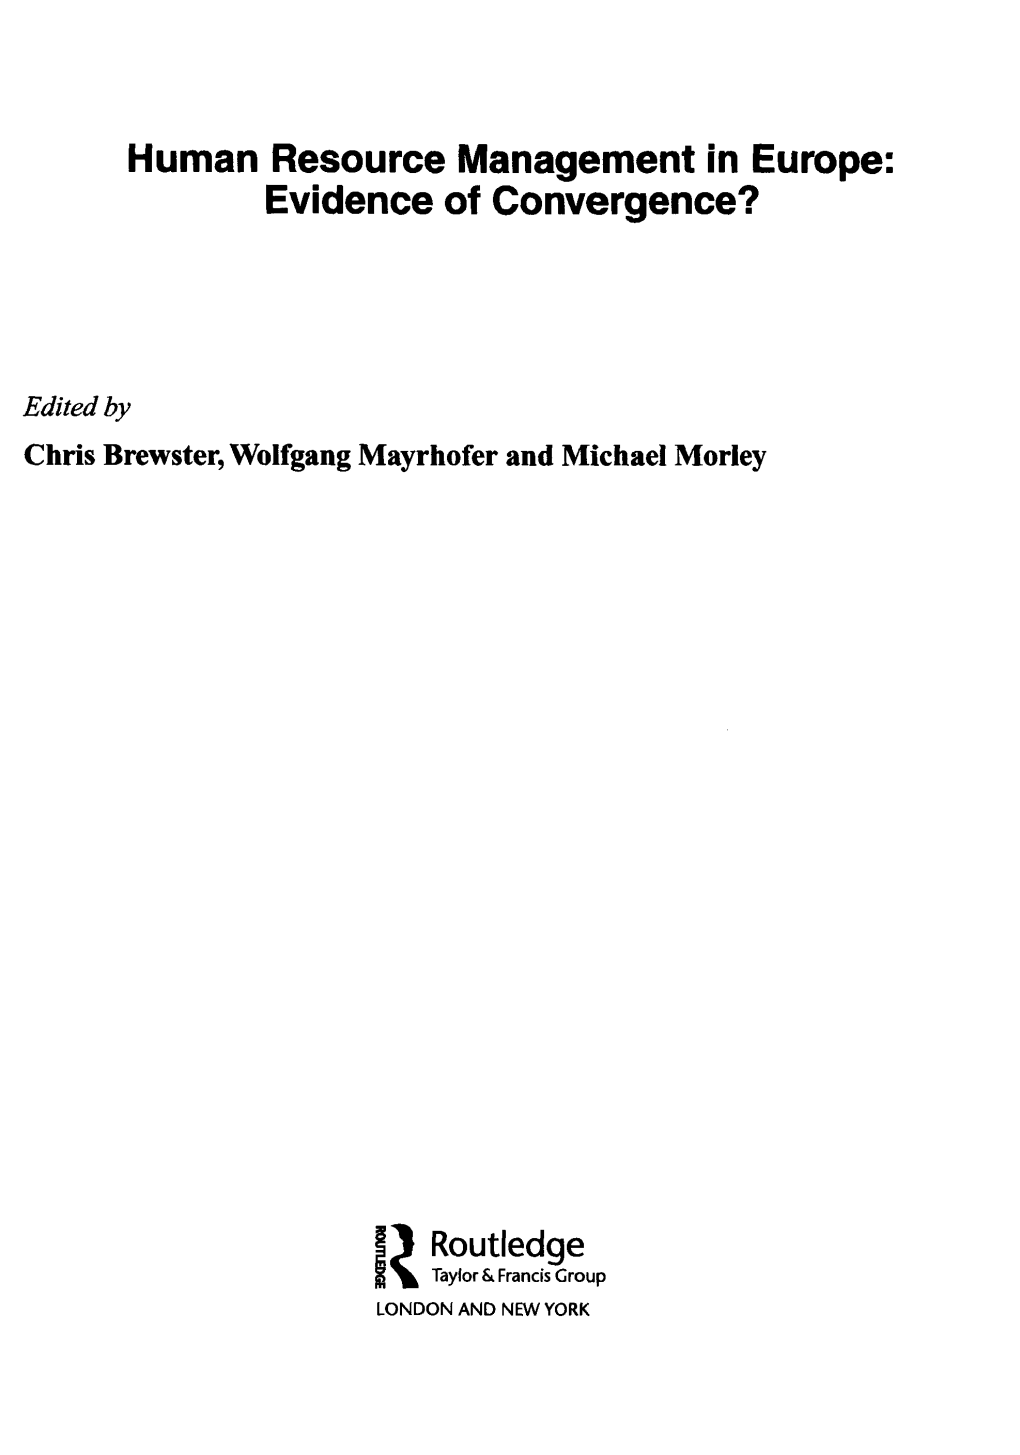 Human Resource Management in Europe: Evidence of Convergence? Edited by Chris Brewster, Wolfgang Mayrhofer and Michael Moriey SJ